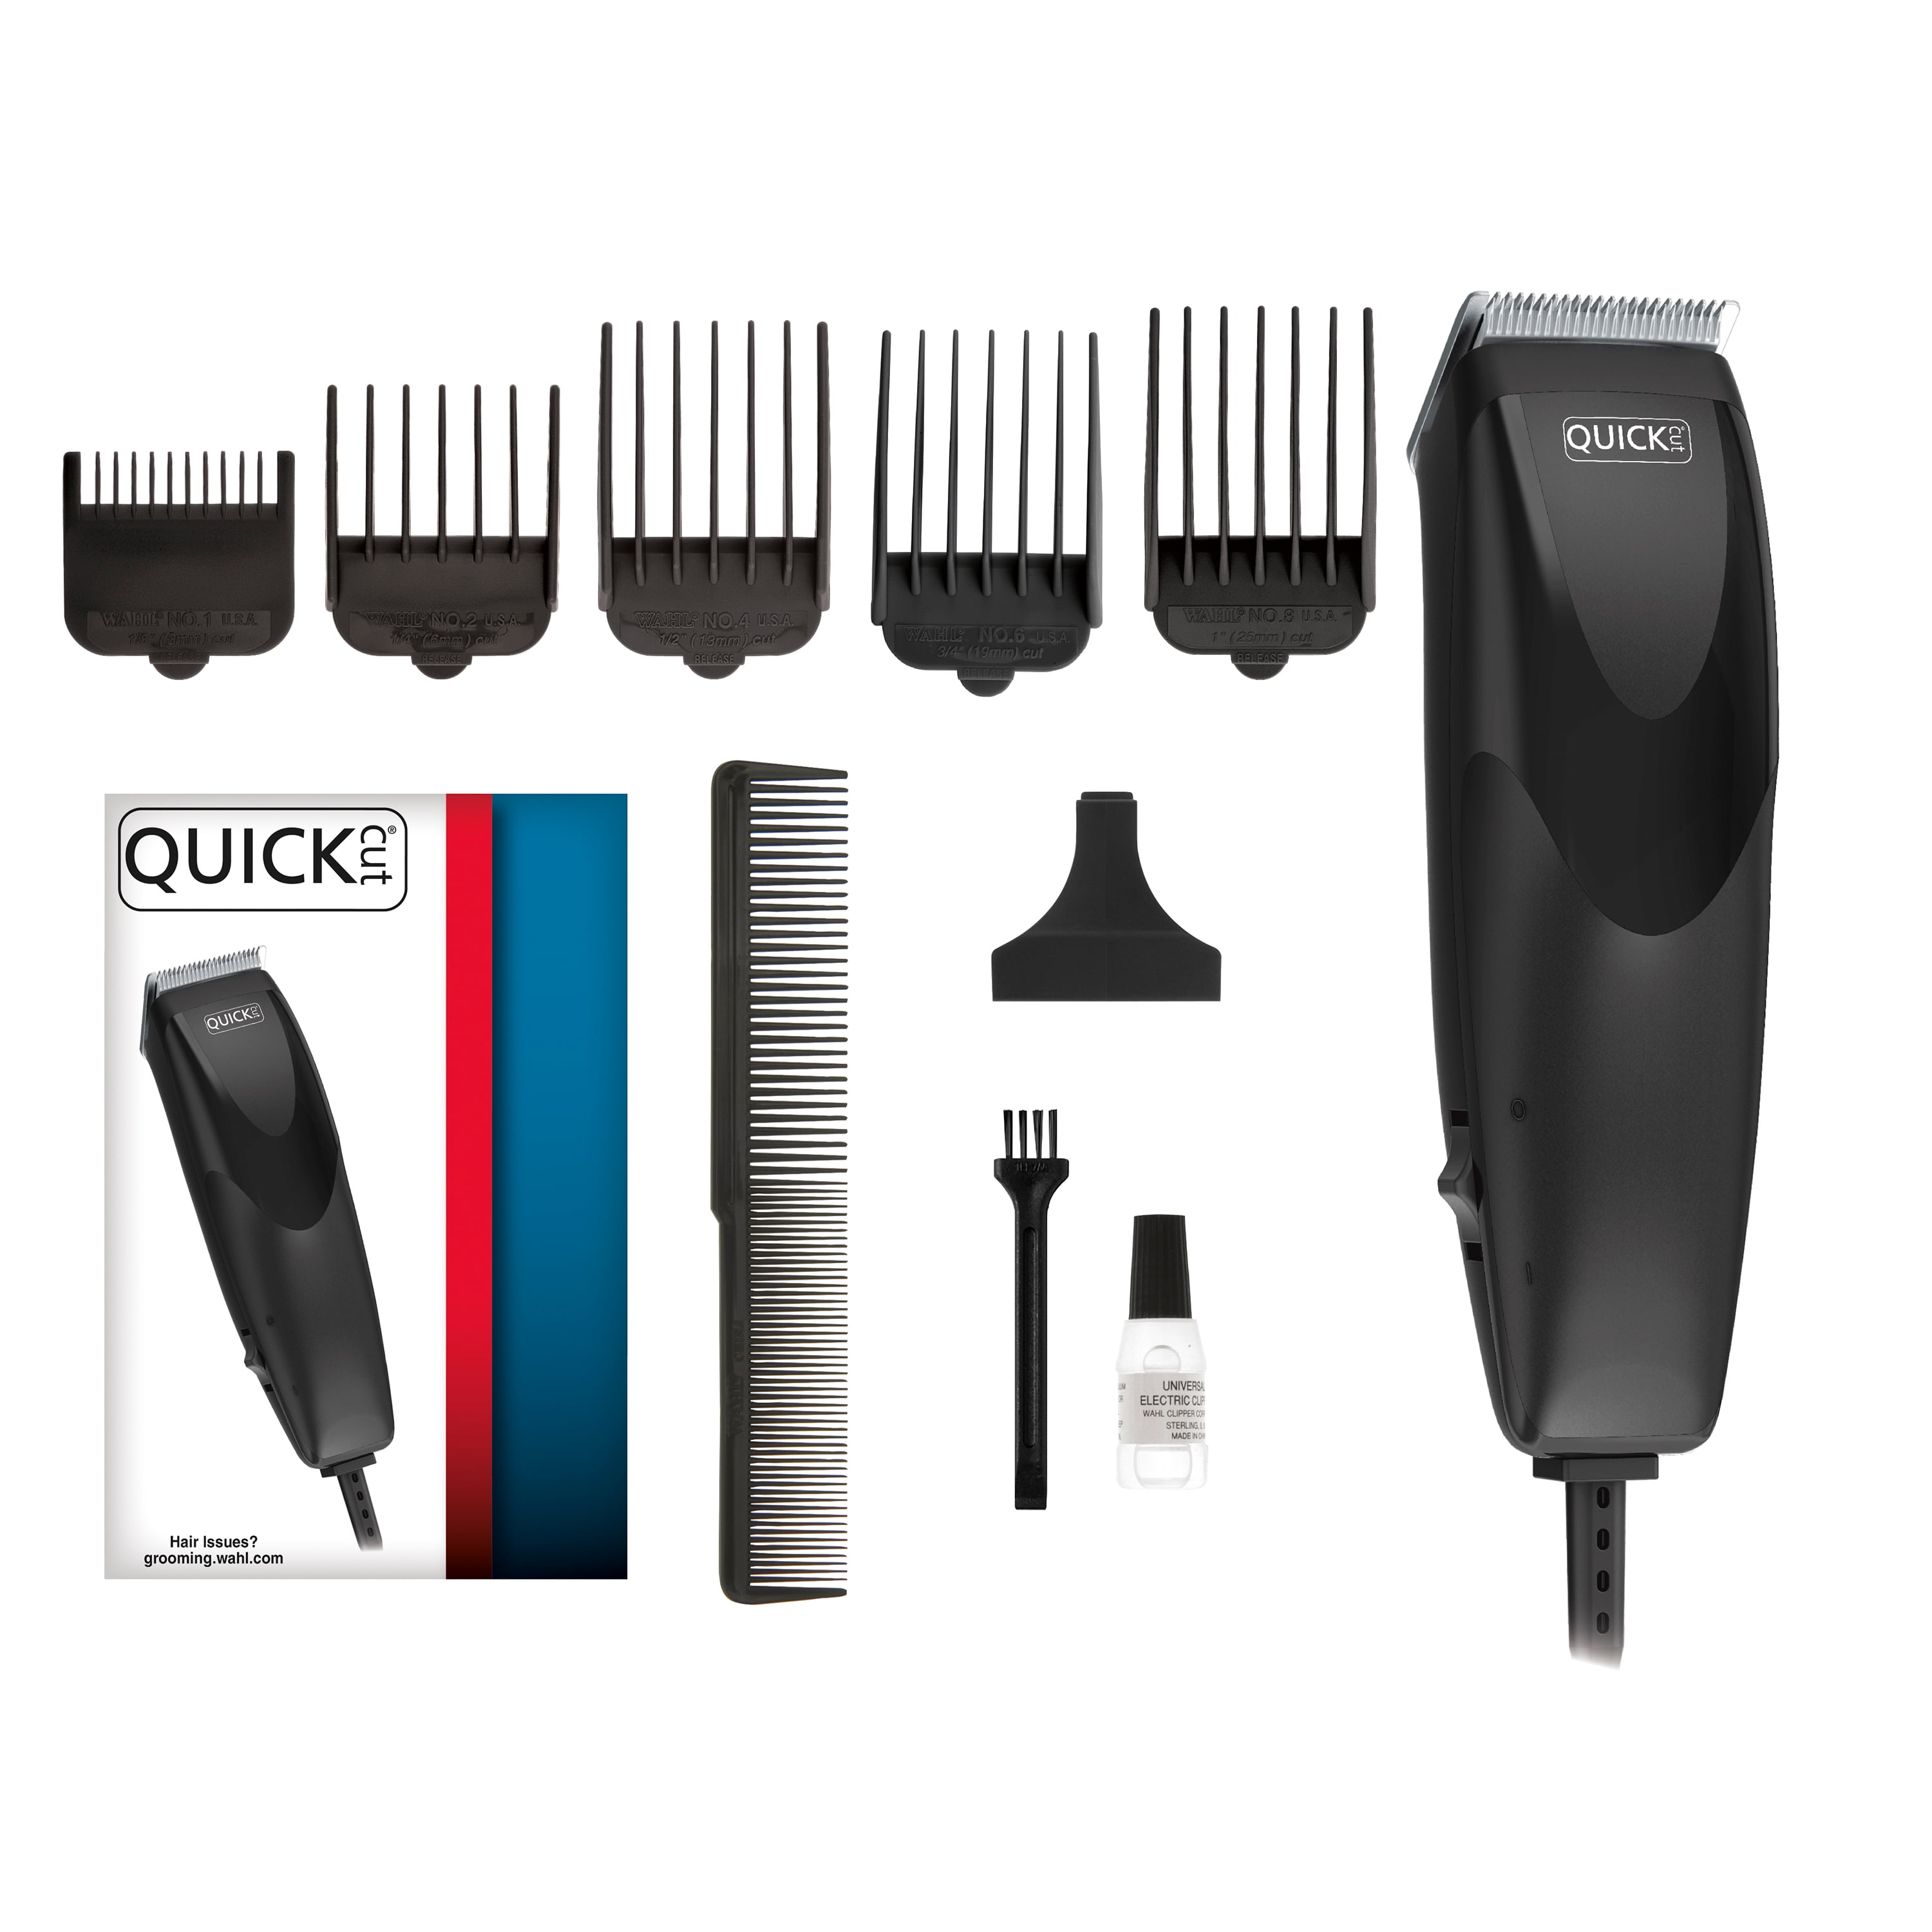 Quick Cut Hair Cutting Kit, 10 Piece Set with Clipper, Styling Guide, Blade  Guard, English & Spanish Instructions, 9314-1501 